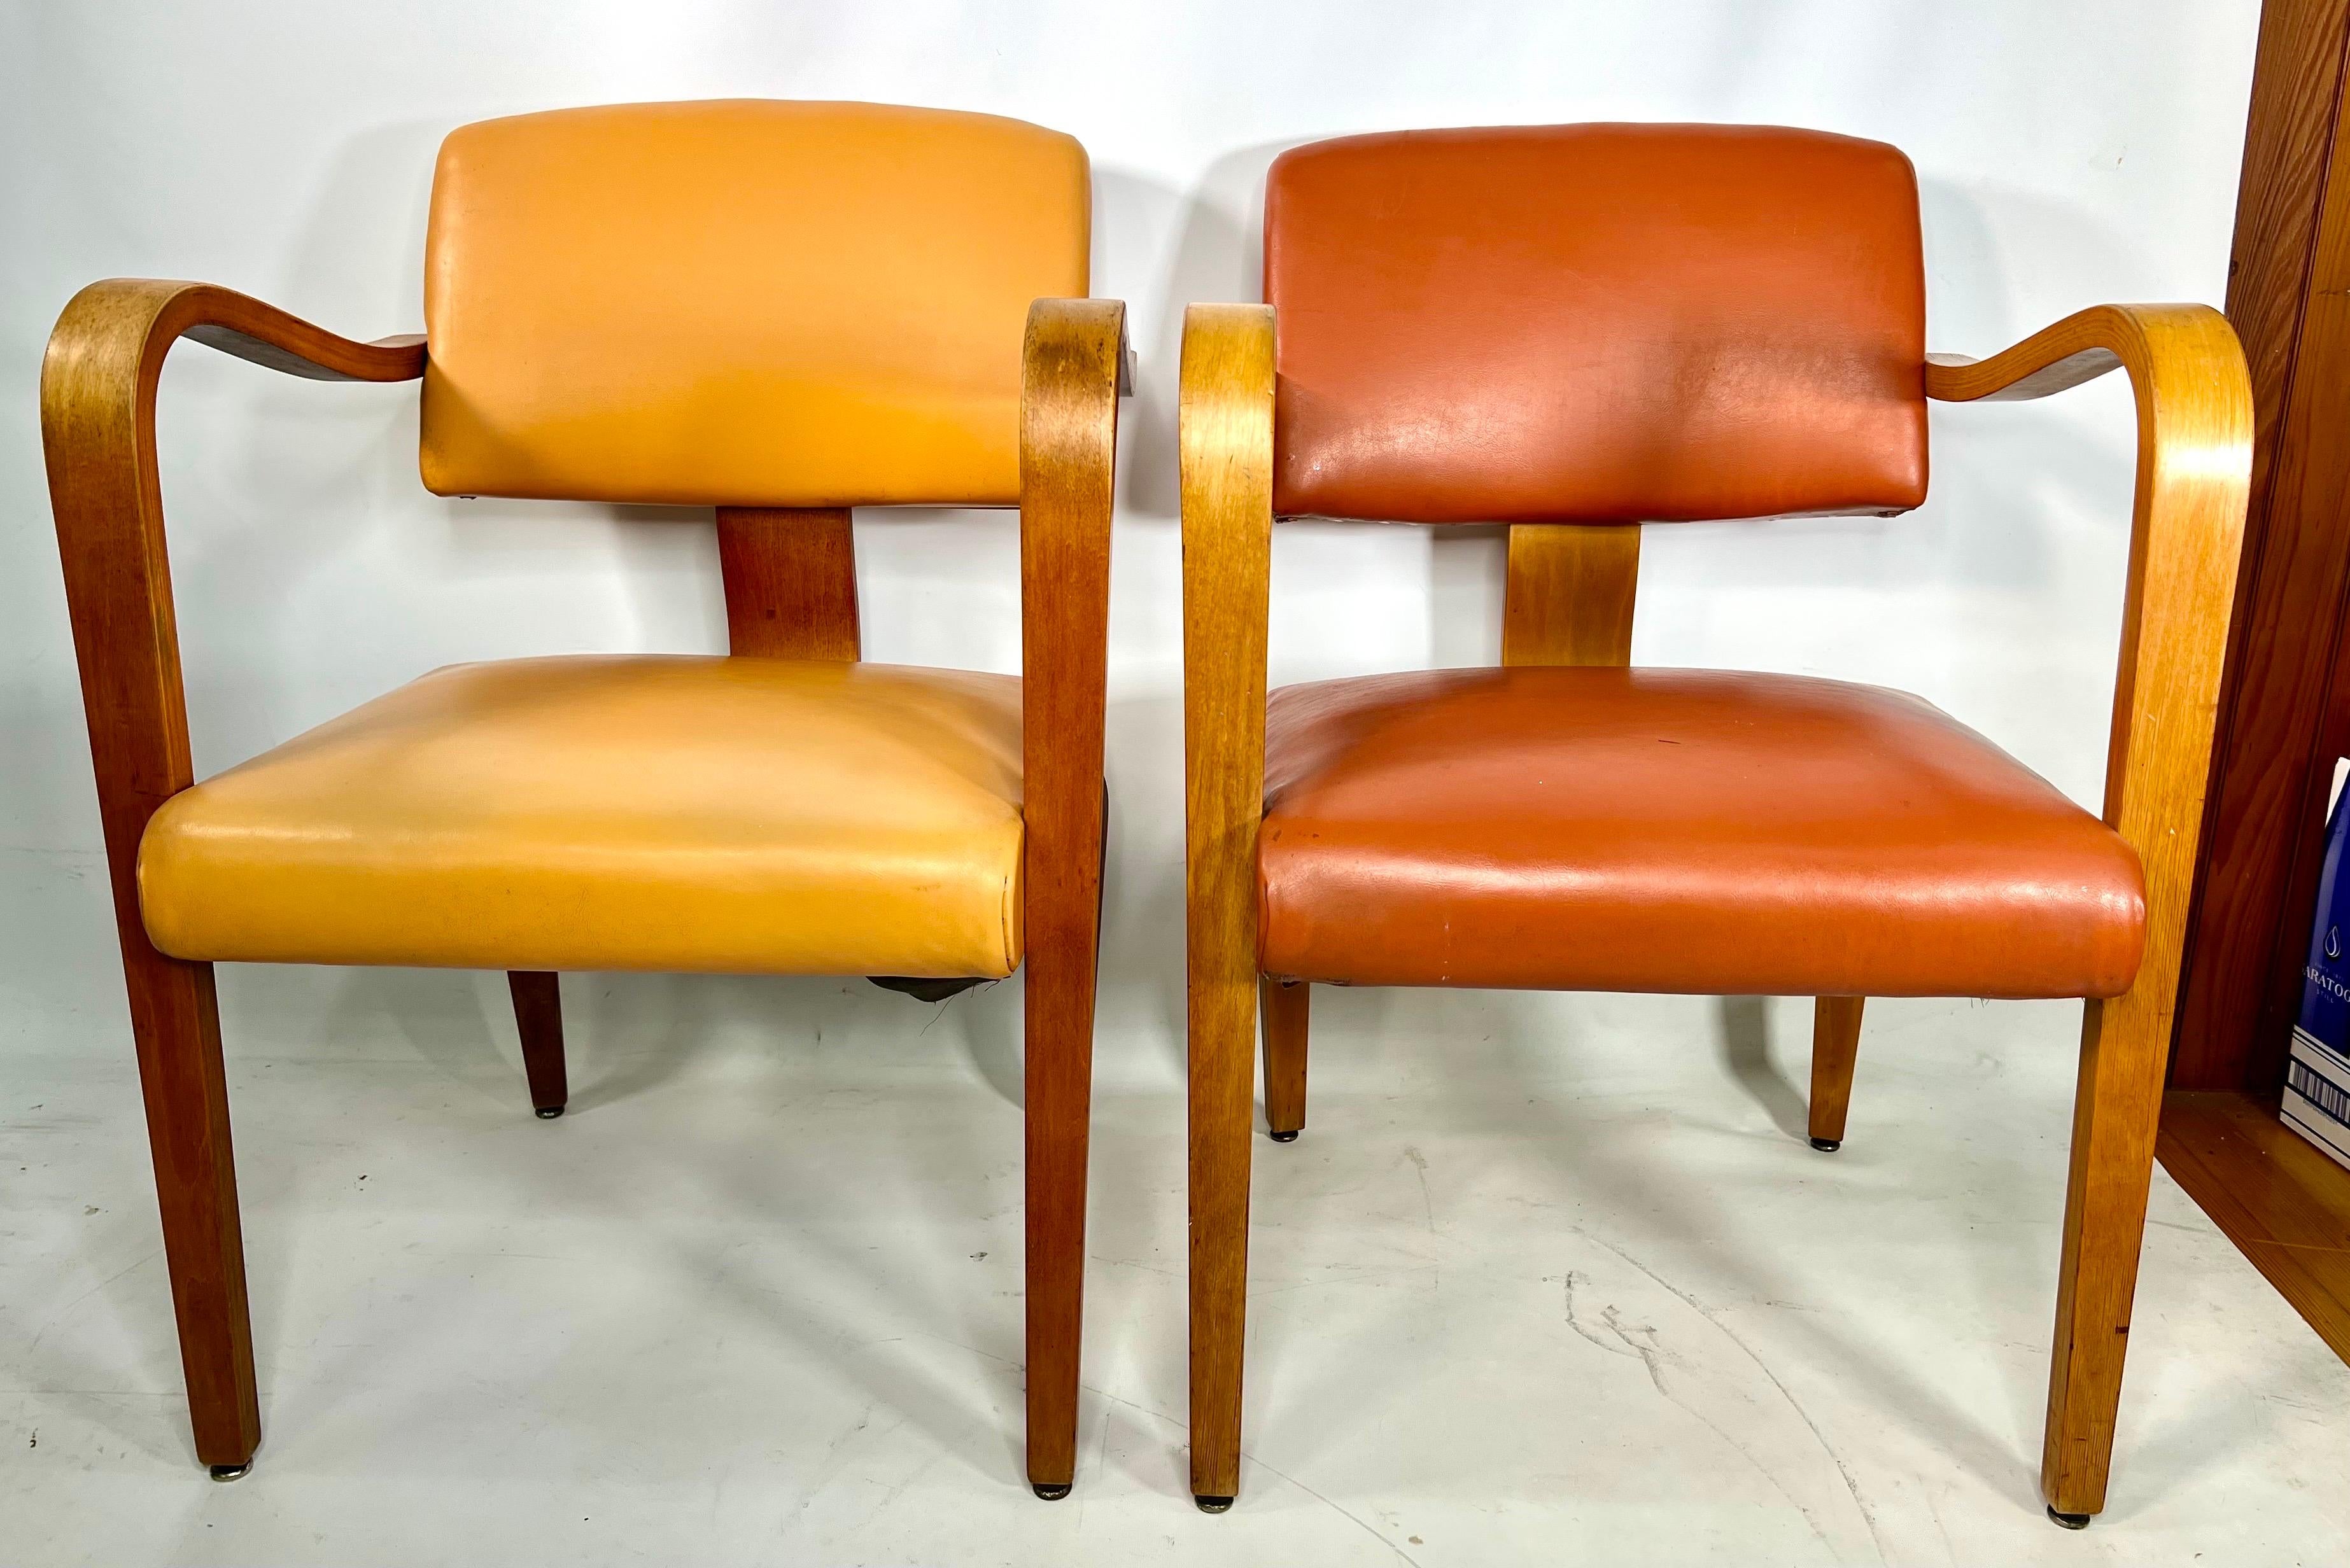 Thonet bentwood lounge chairs - a pair. This is a very nice all original pair of thonet bentwood chairs.